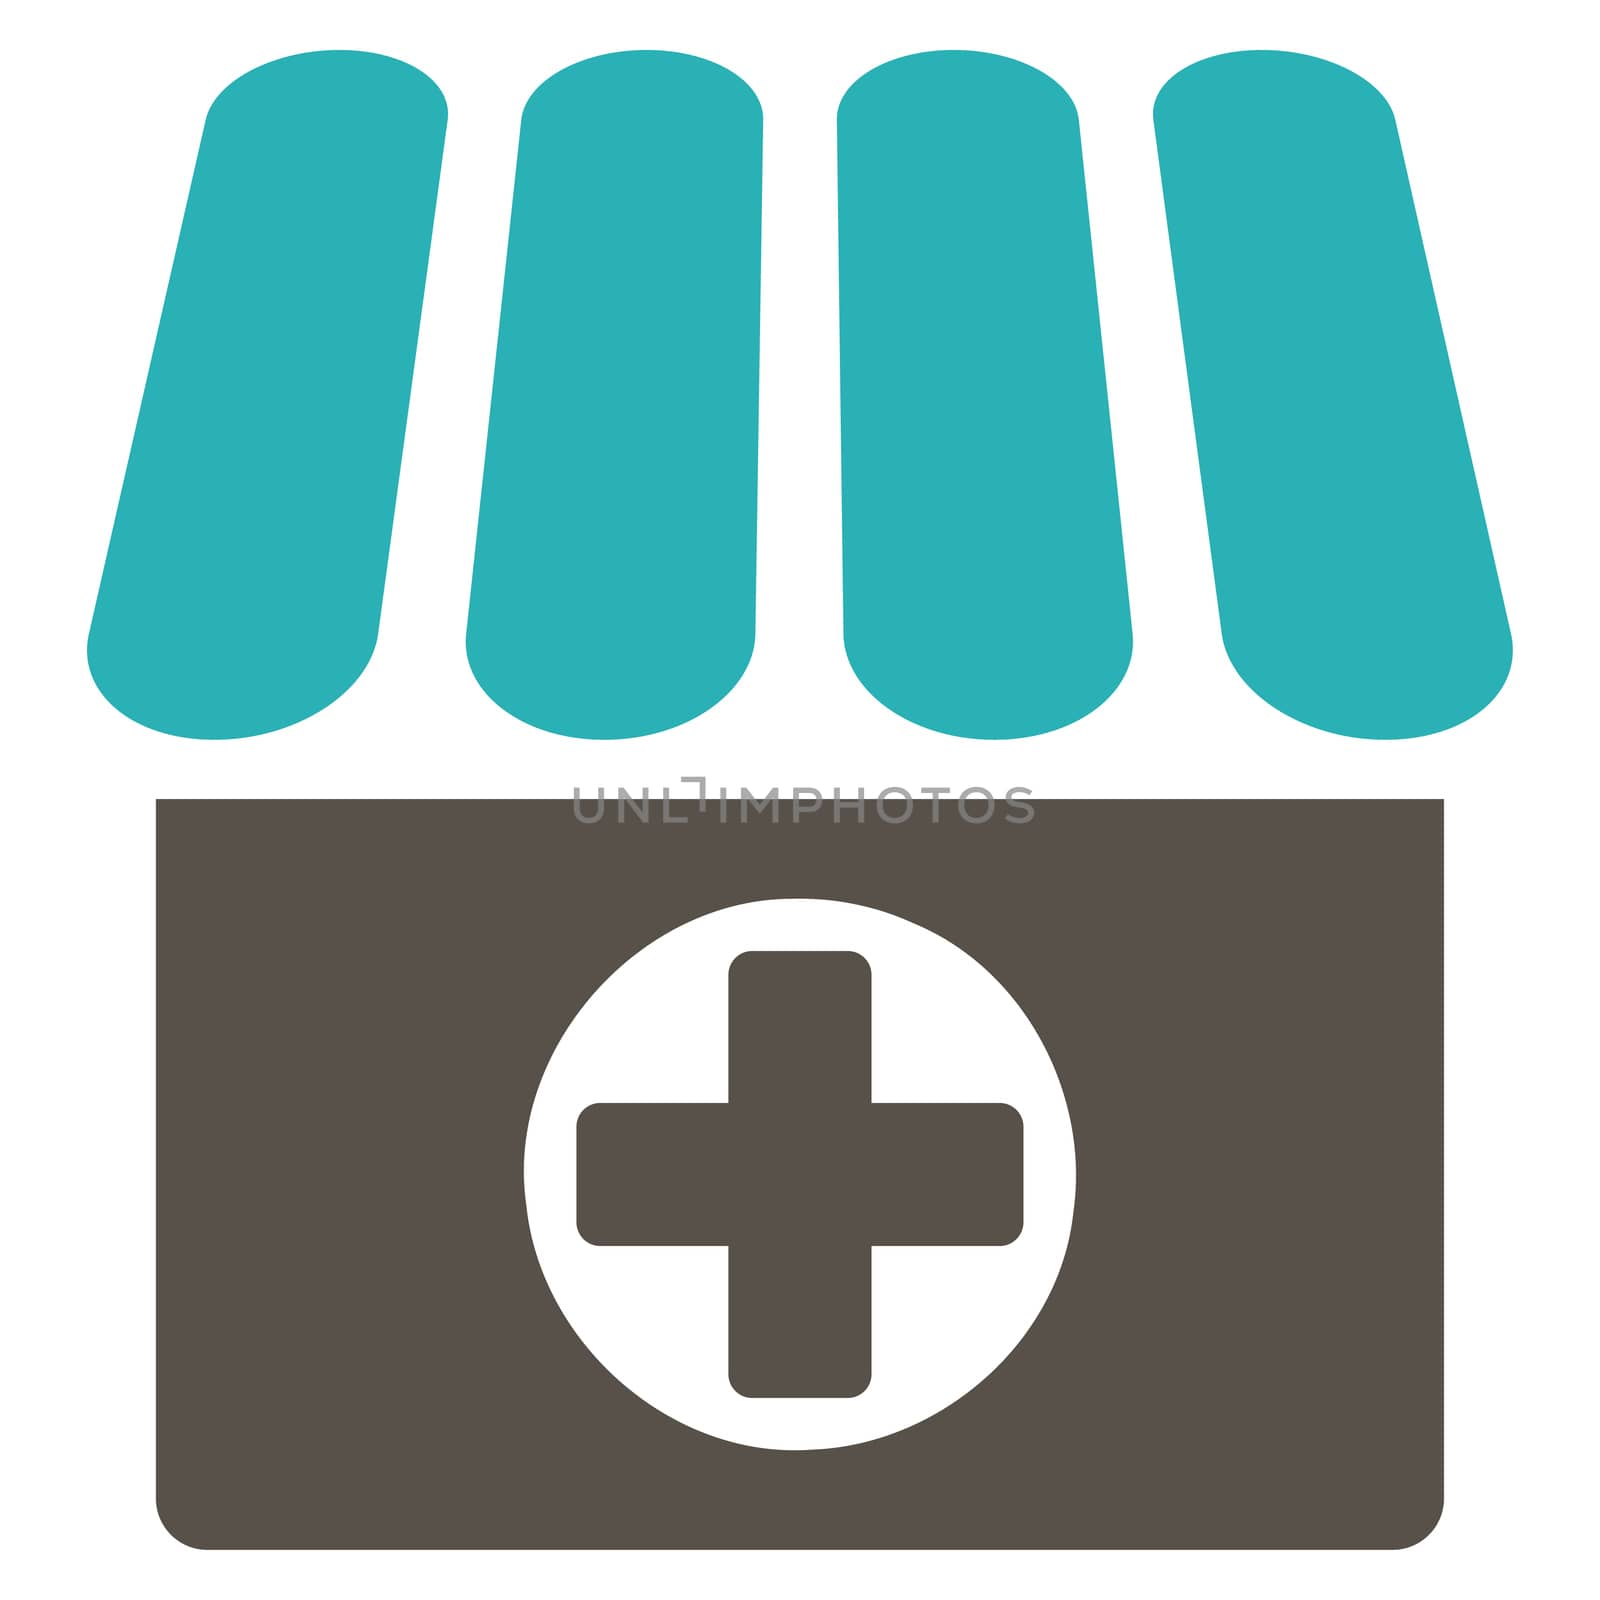 Apothecary raster icon. Style is bicolor flat symbol, grey and cyan colors, rounded angles, white background.